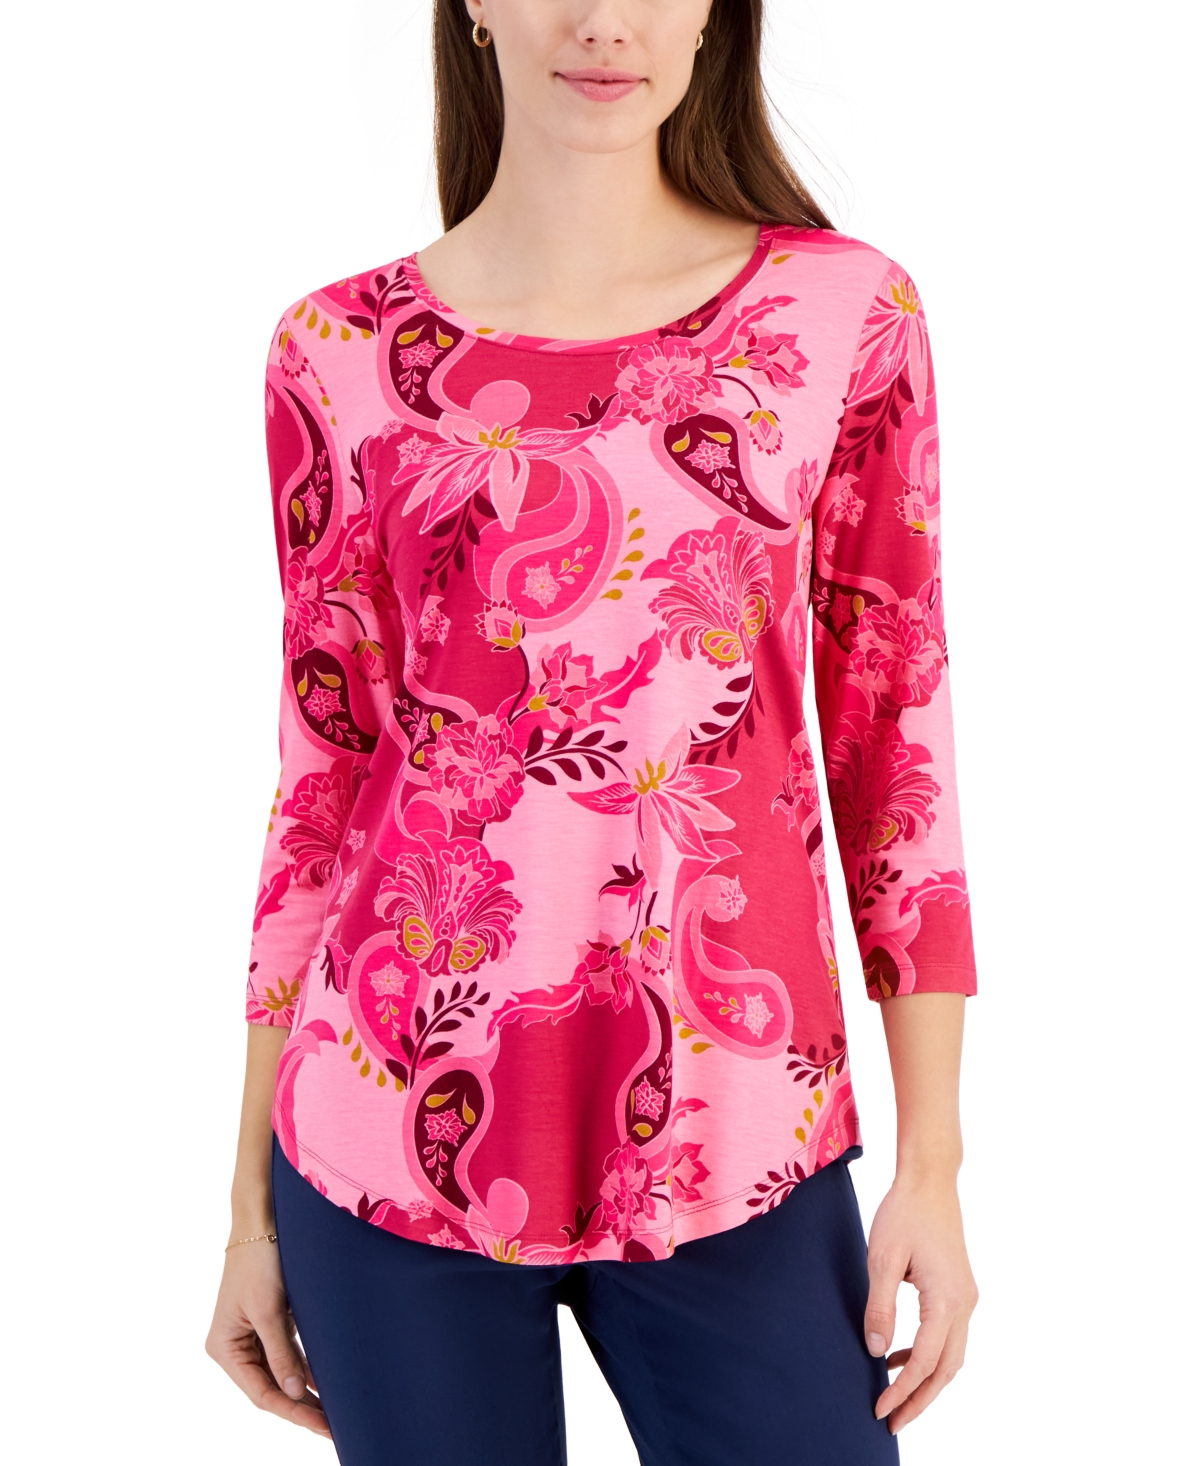 Women's 3/4 Sleeve Printed Top, Created for Macy's - Claret Rose Combo